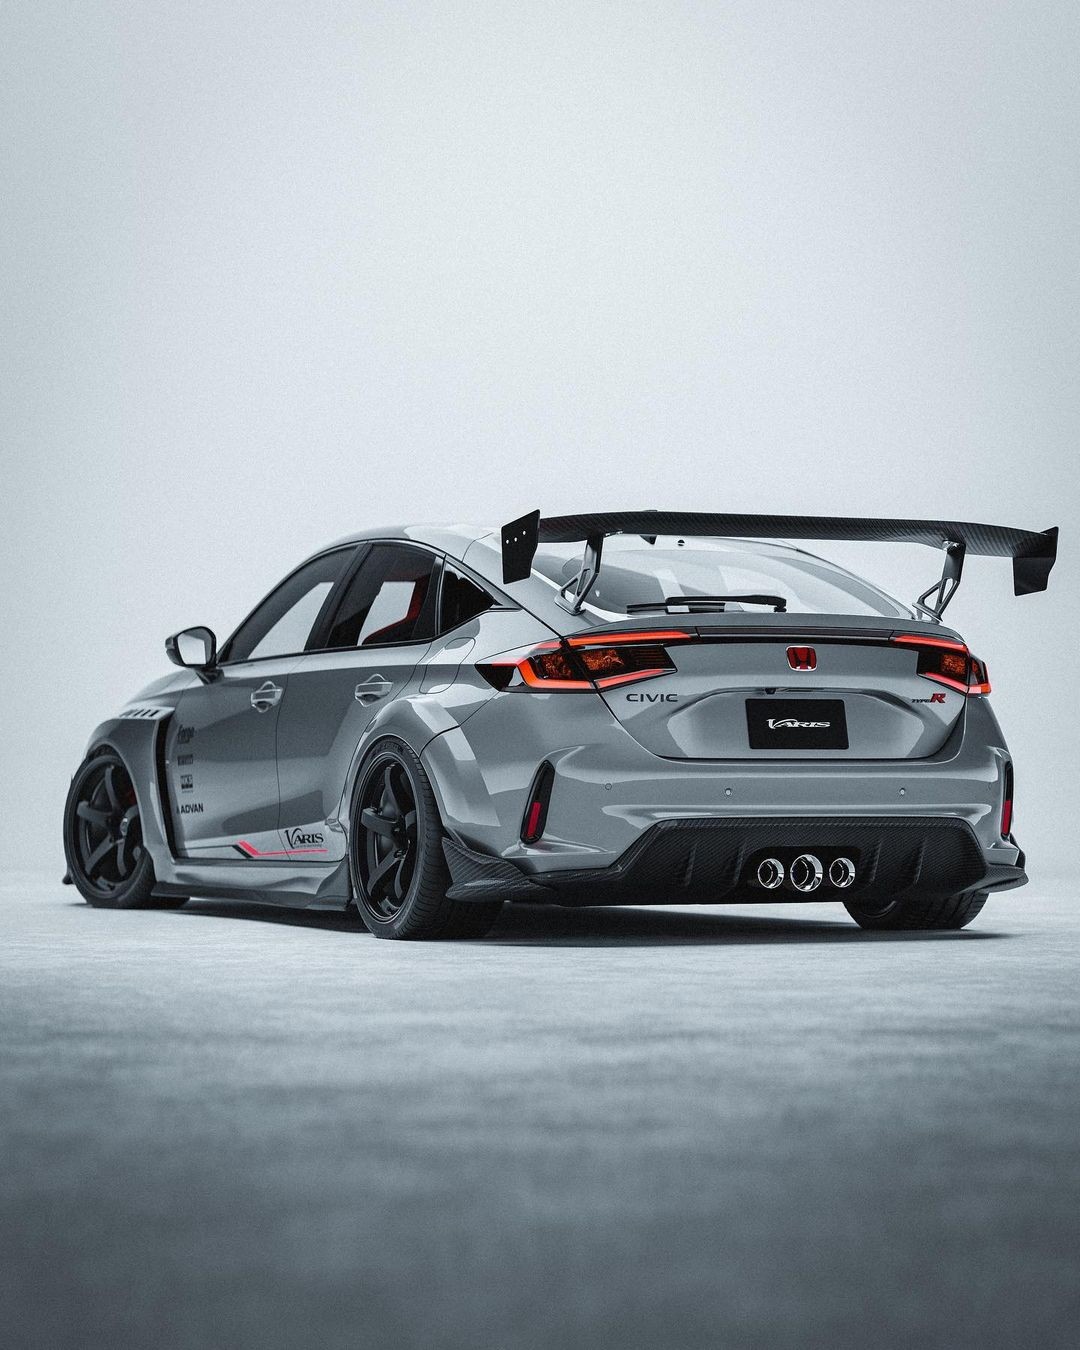 2023 Honda Civic Type R Adopts a Meaner Stance, Body Kit Ain't Real